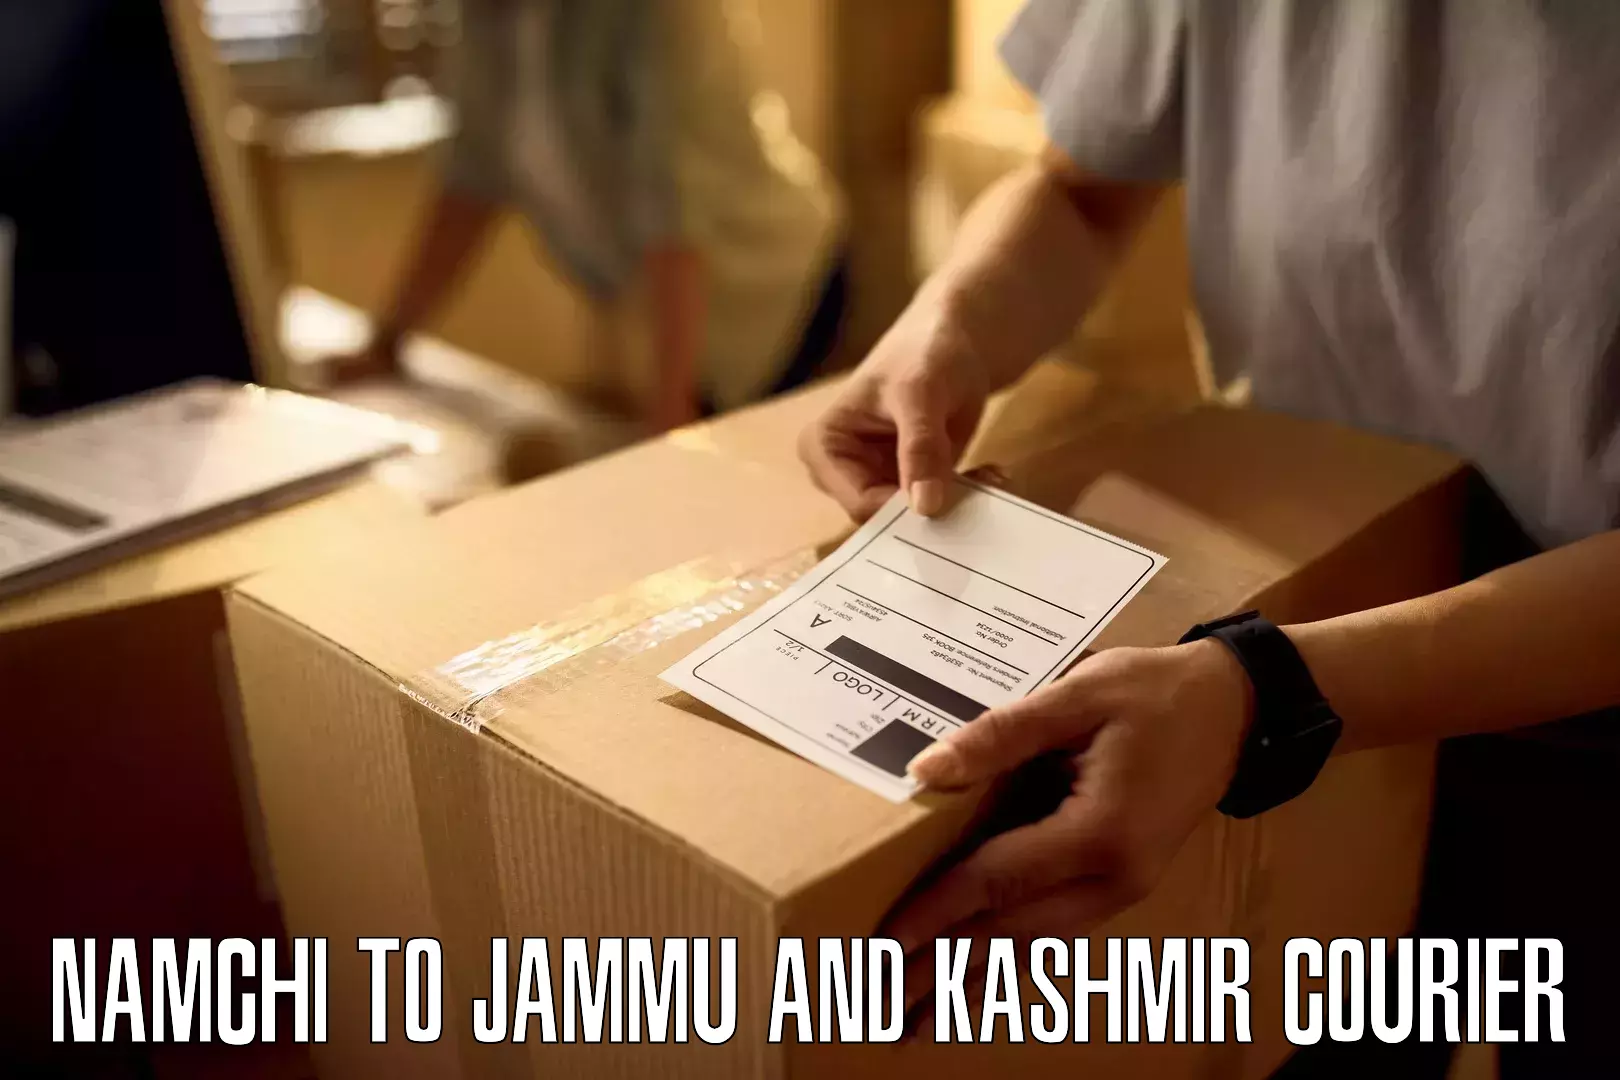 Nationwide delivery network Namchi to Jakh